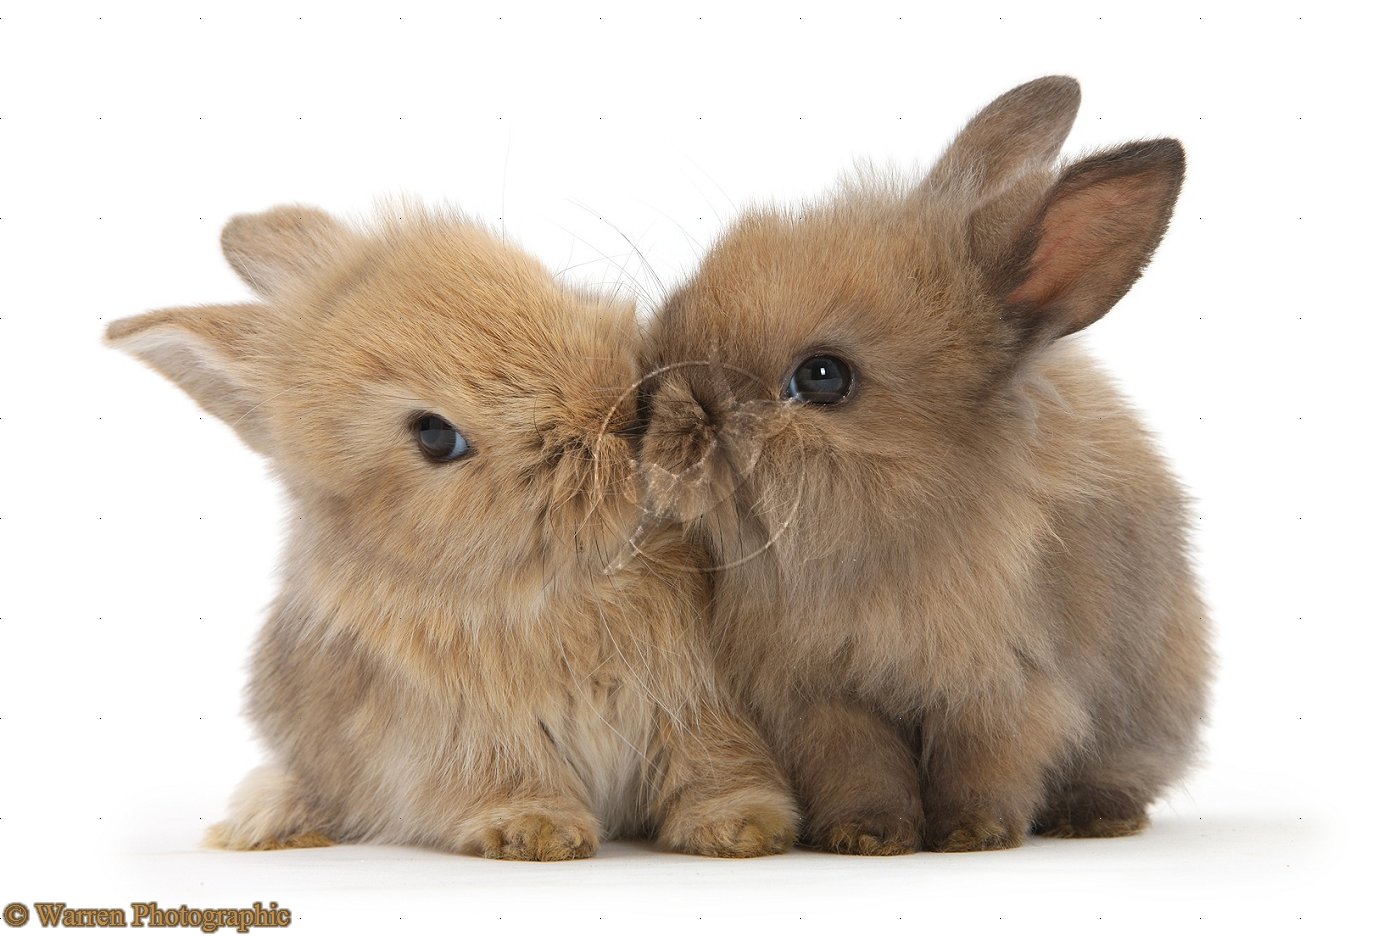 Cute Baby Rabbits 9888 Hd Wallpapers in Animals   Imagescicom